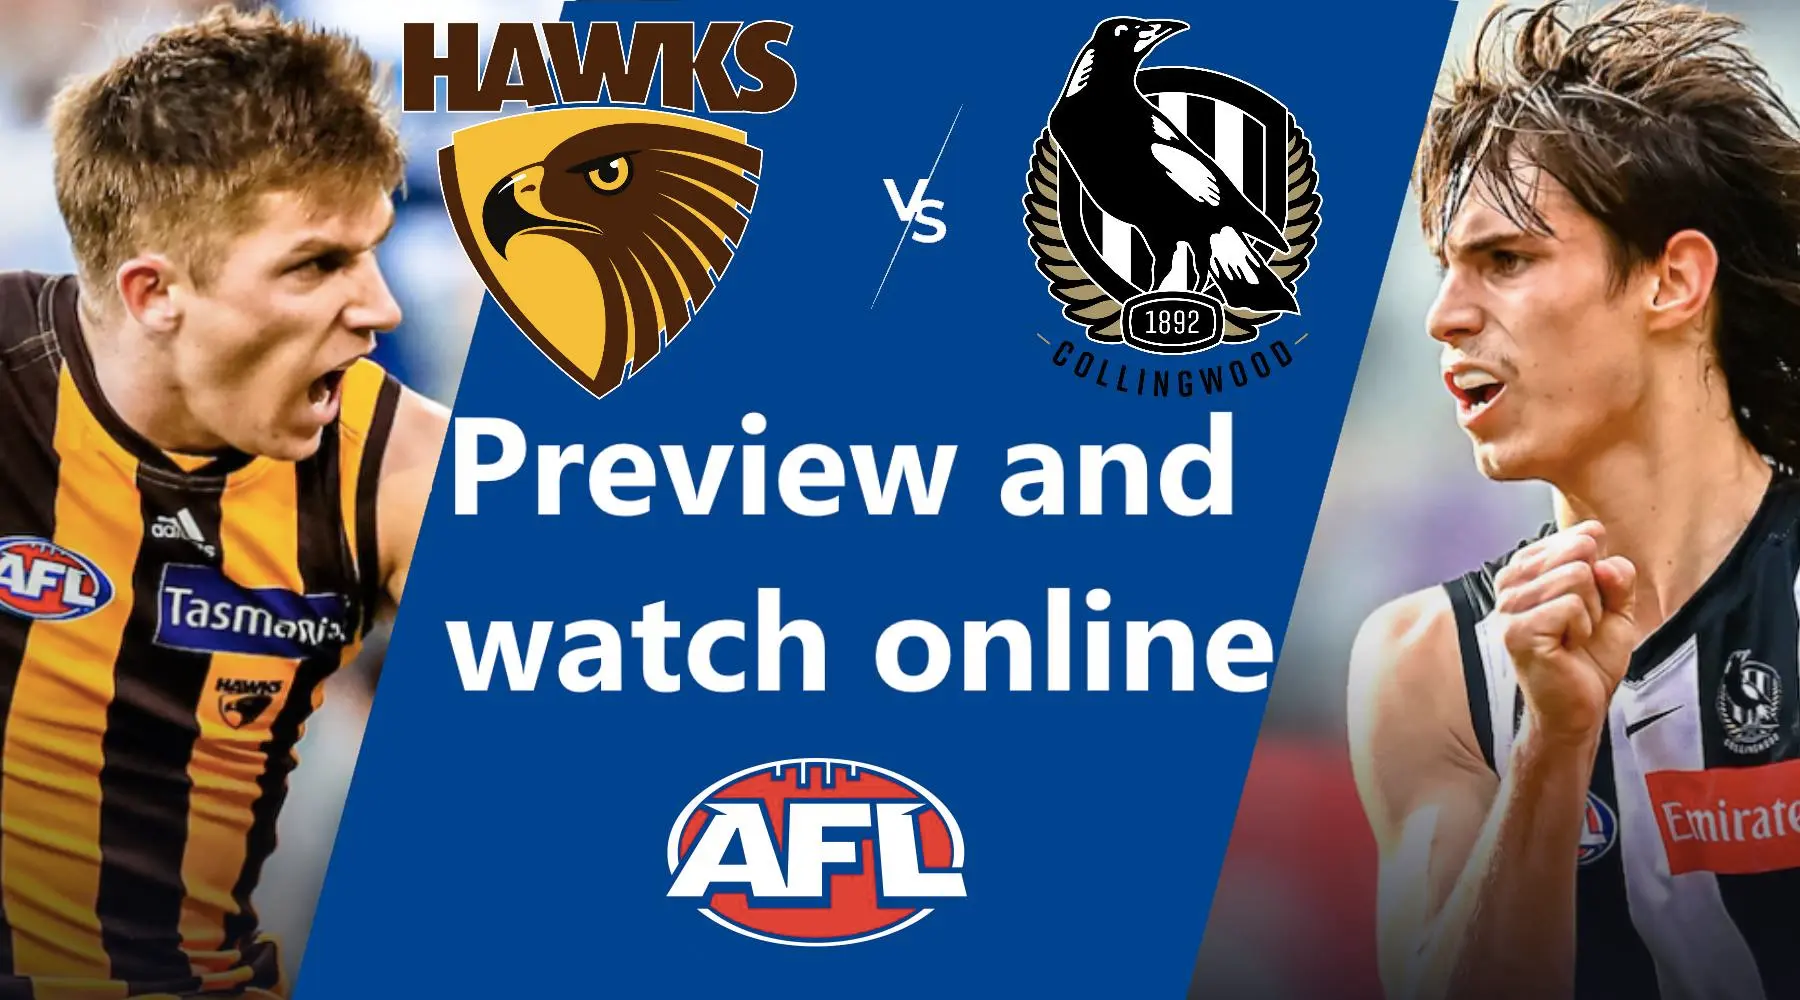 How to watch Hawthorn vs Collingwood AFL live and match preview